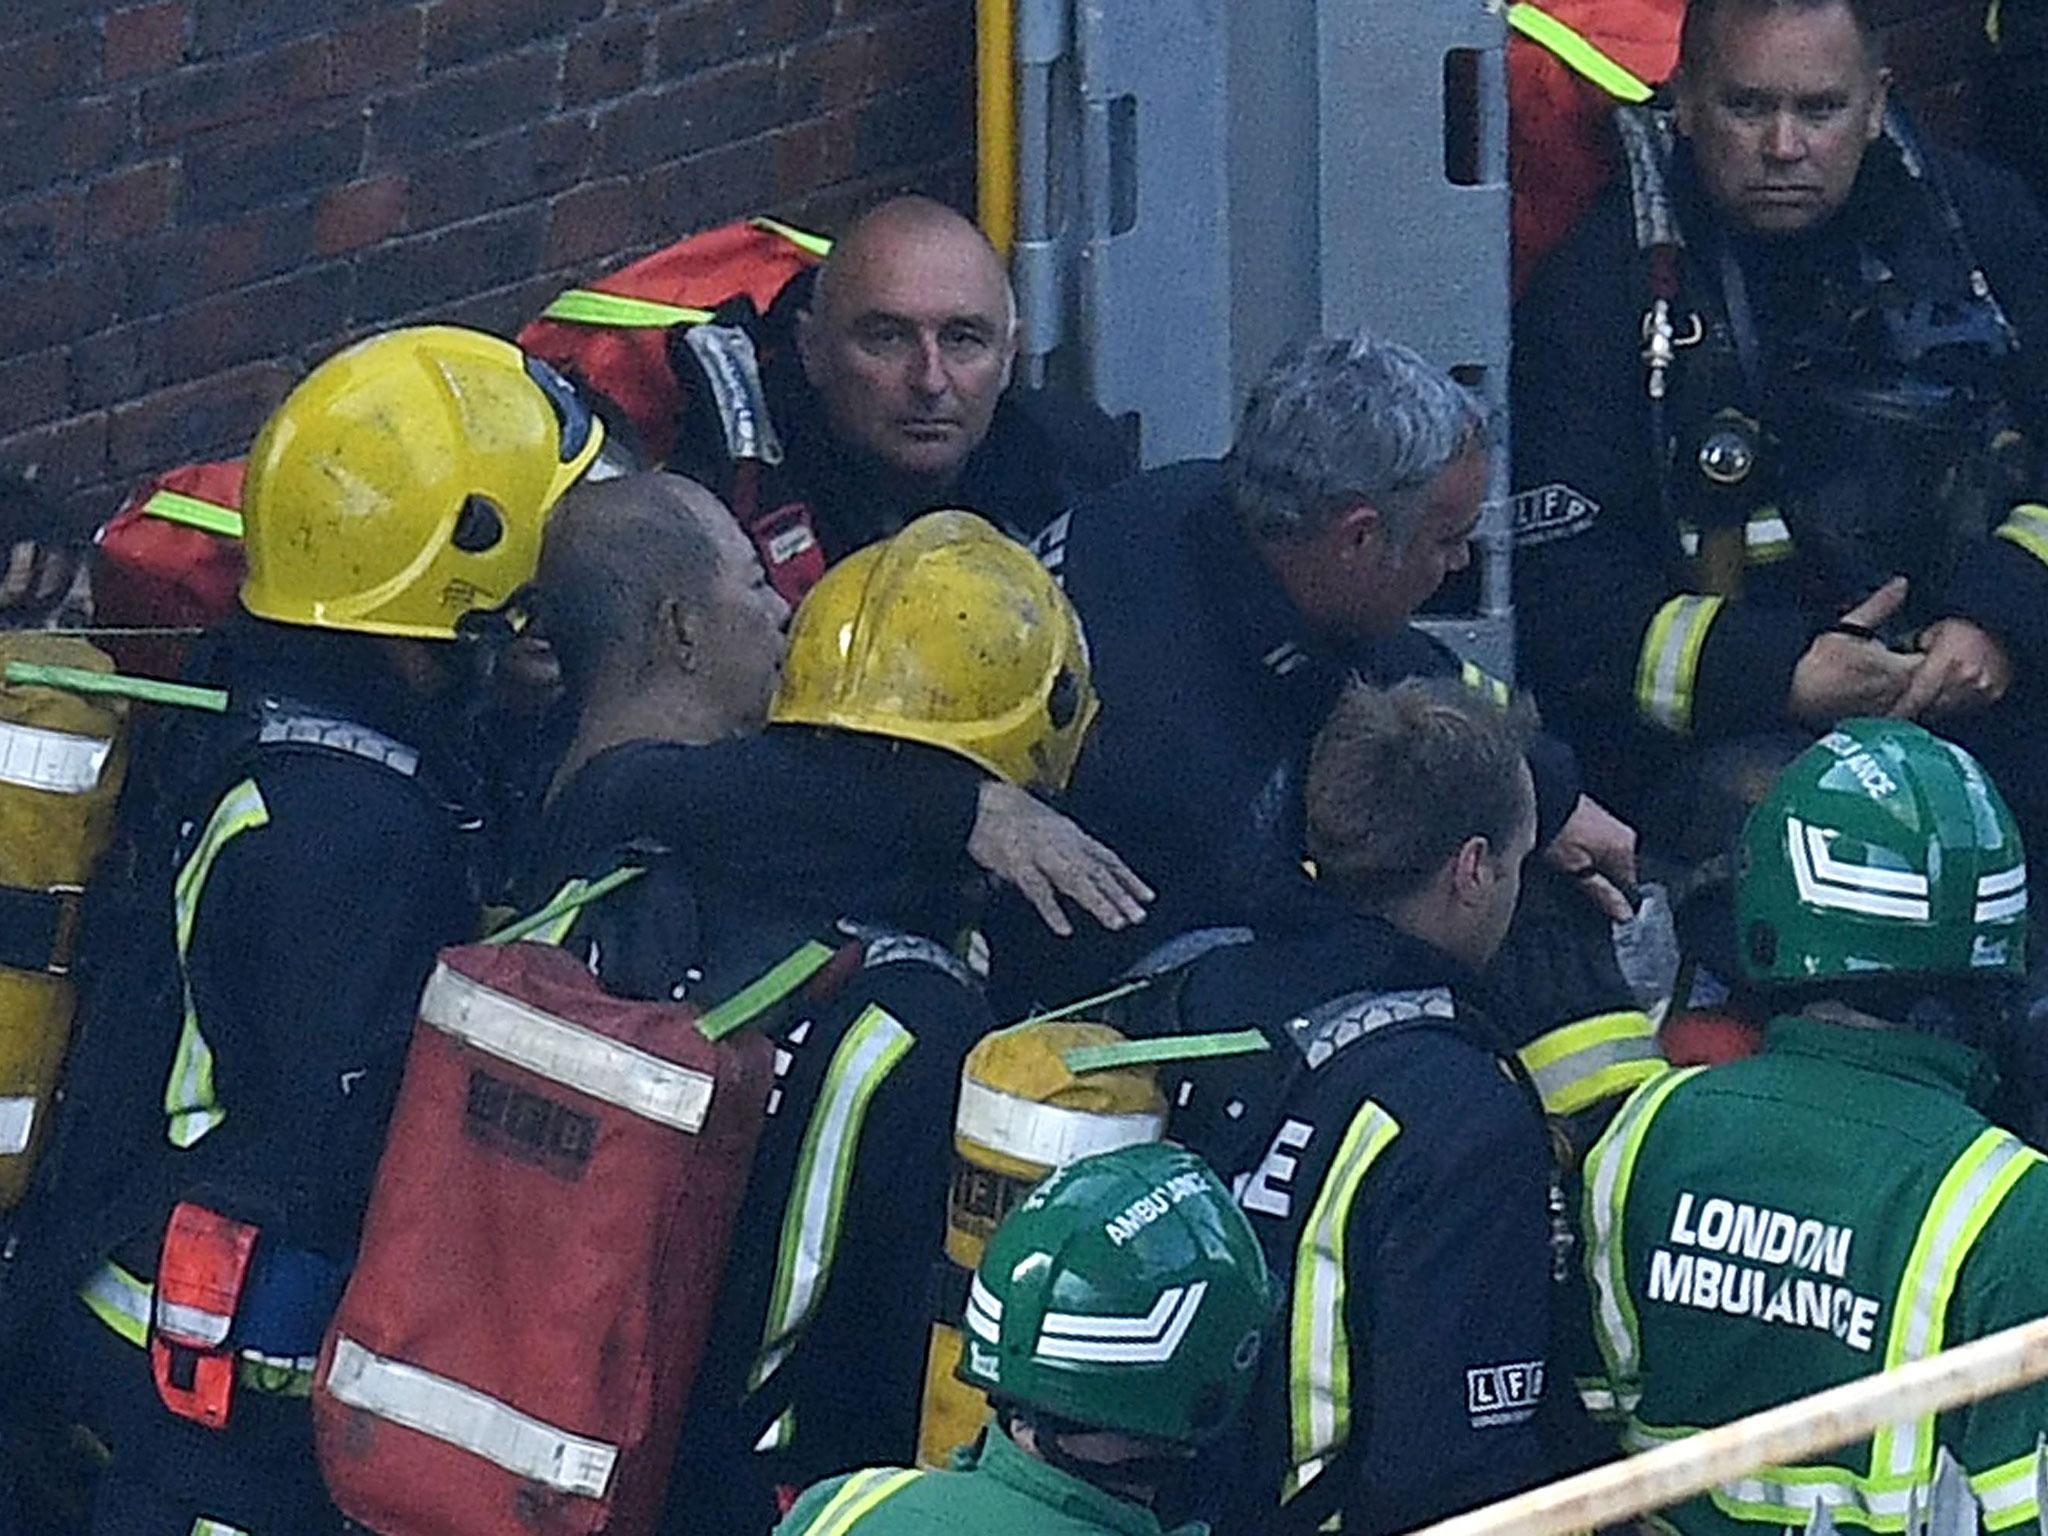 Firefighters rescue a man from the huge fire that engulfed Grenfell Tower